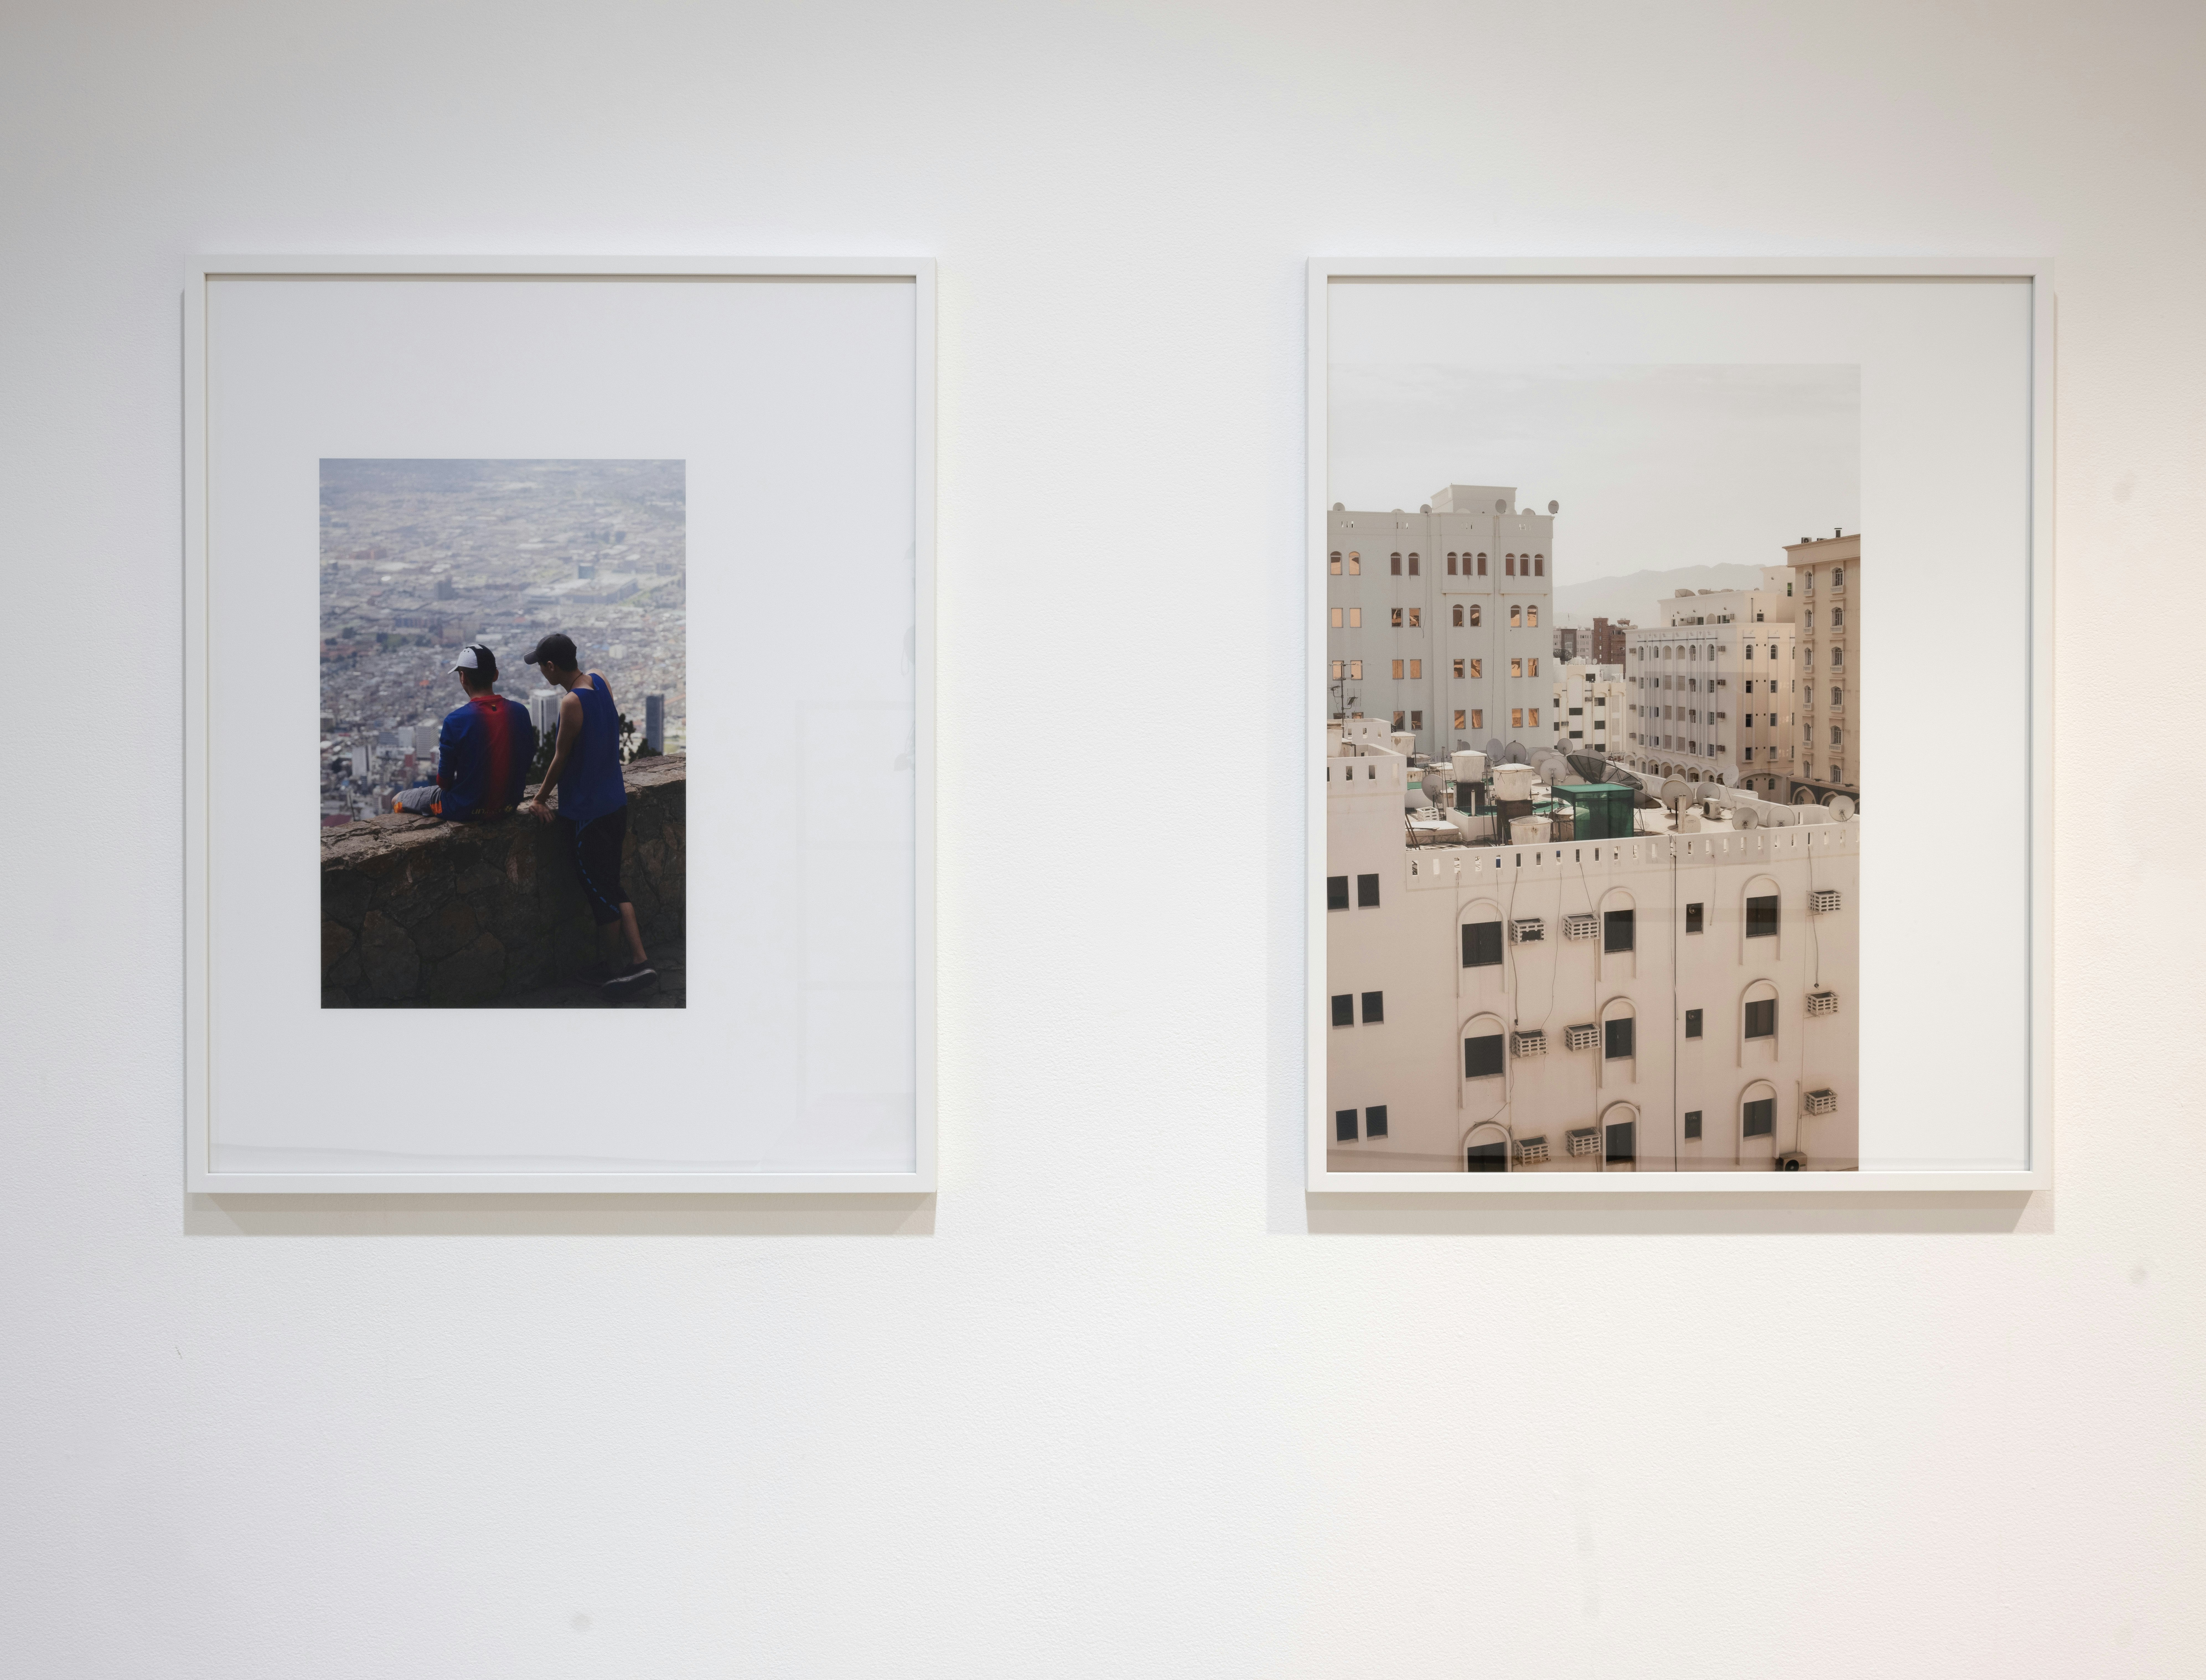 Two photographic prints in white frames on a gallery wall. The left print is of two male-presenting figures looking over a city, the right is a shot of tall white residential buildings.